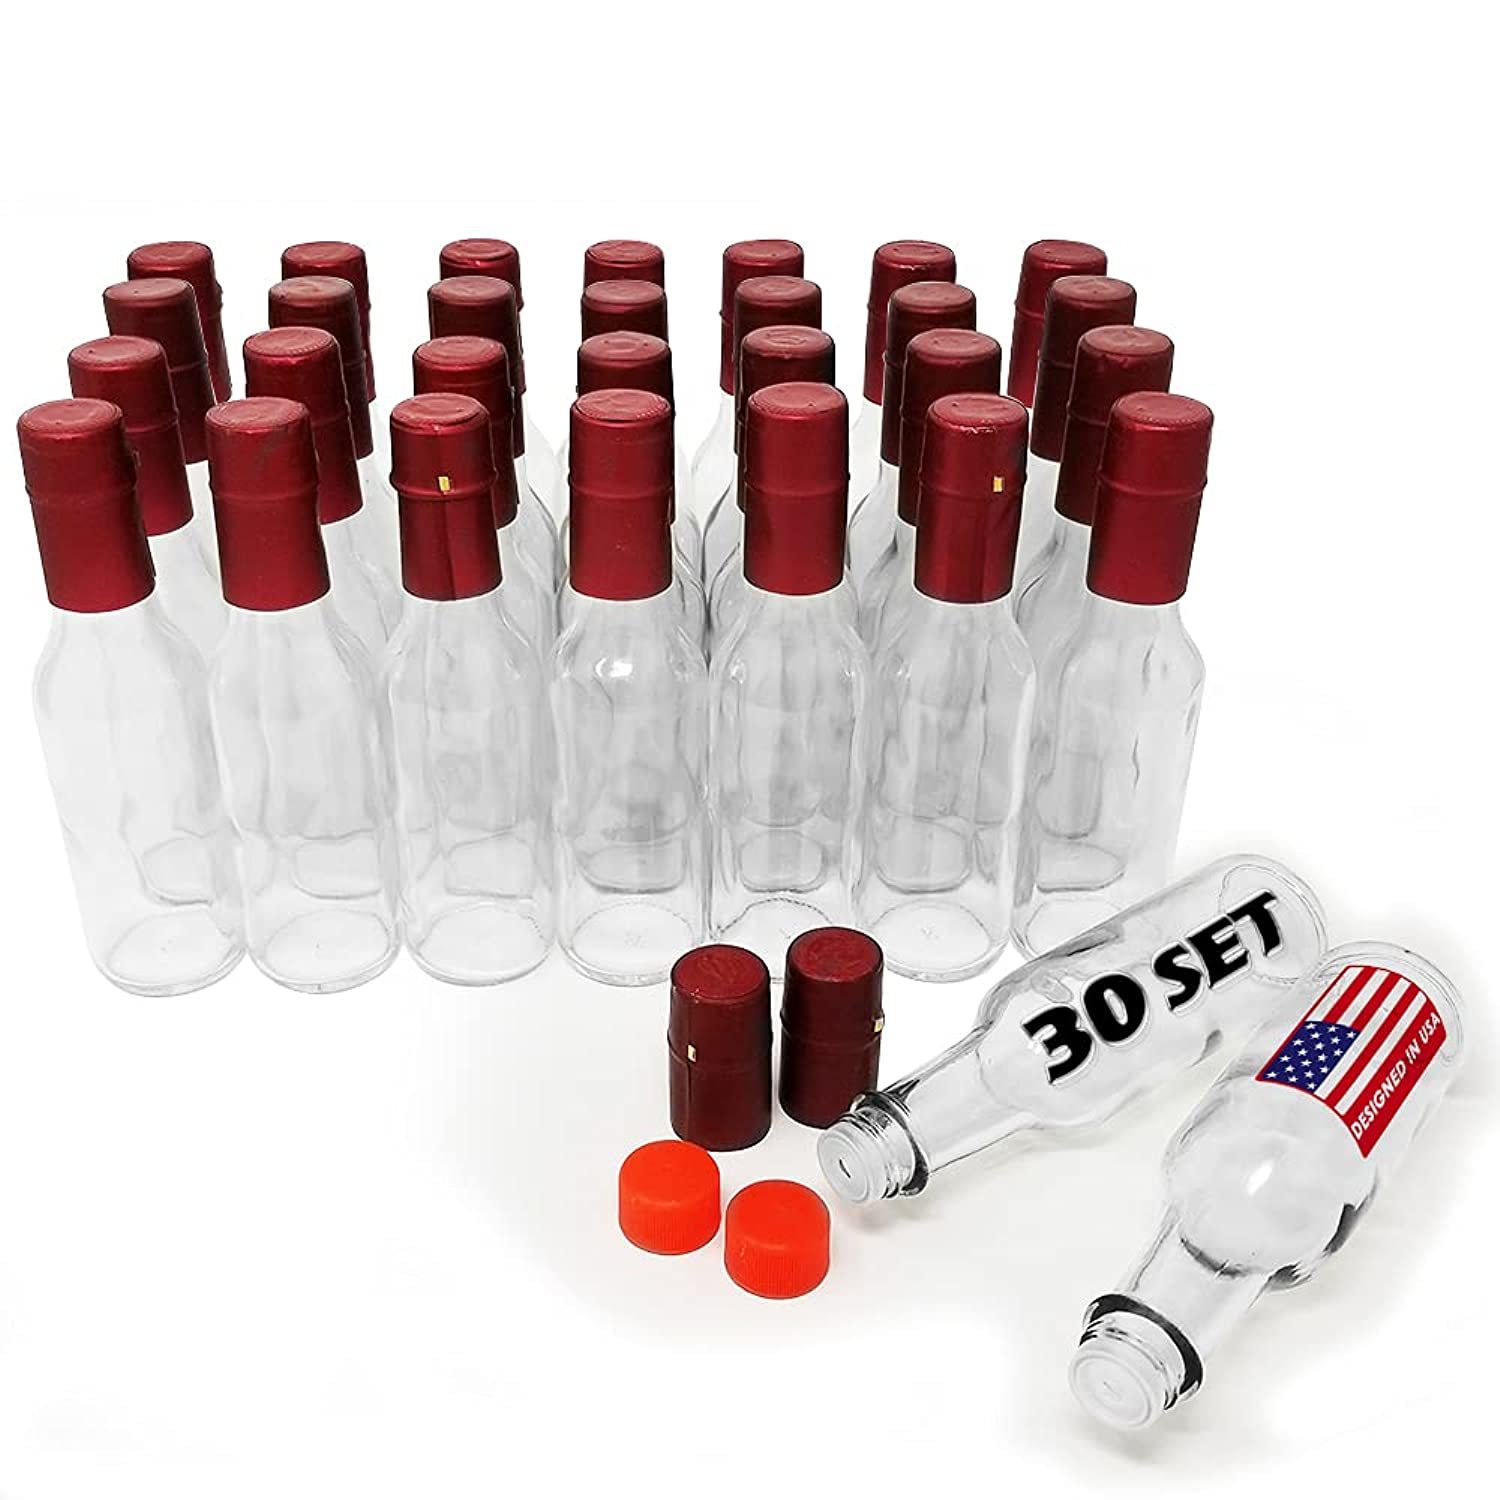 5 oz, Glass Woozy Hot Sauce Bottles - Case of 24 with Screw Caps, Inserts &  Shrink